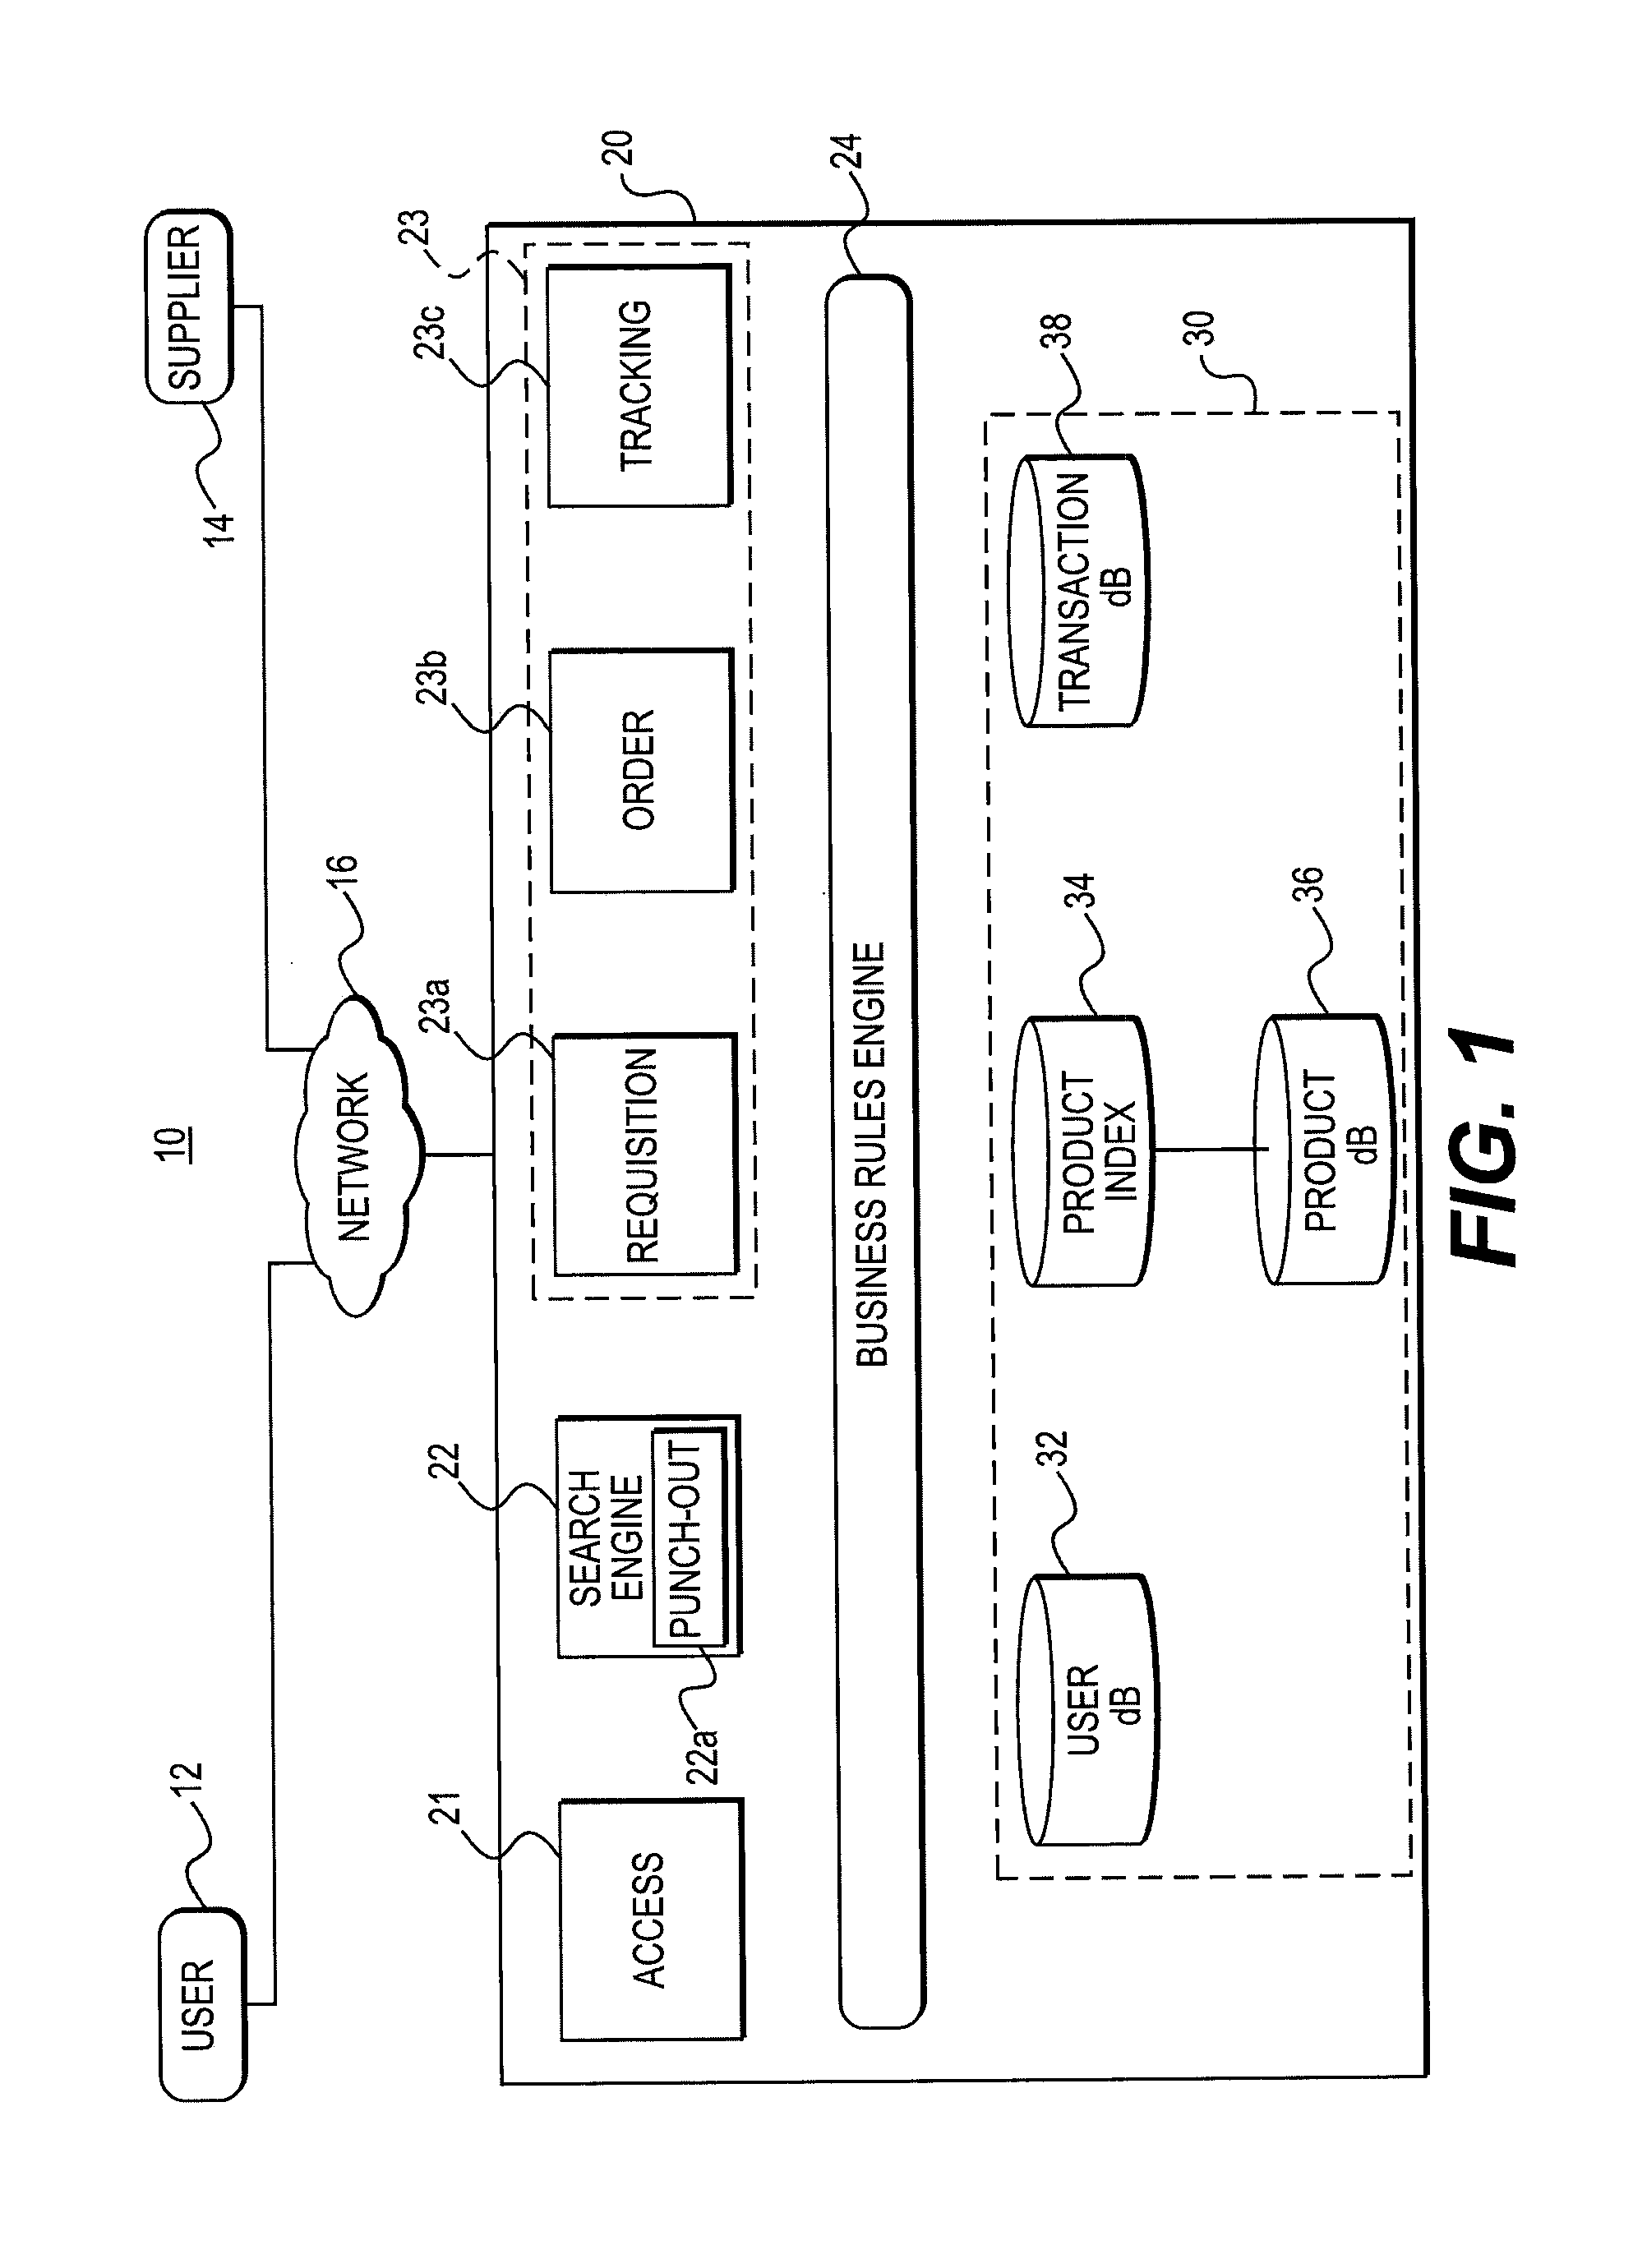 Systems and Methods for Managing Supplier Information Between an Electronic Procurement System and Buyers' Supplier Management Systems